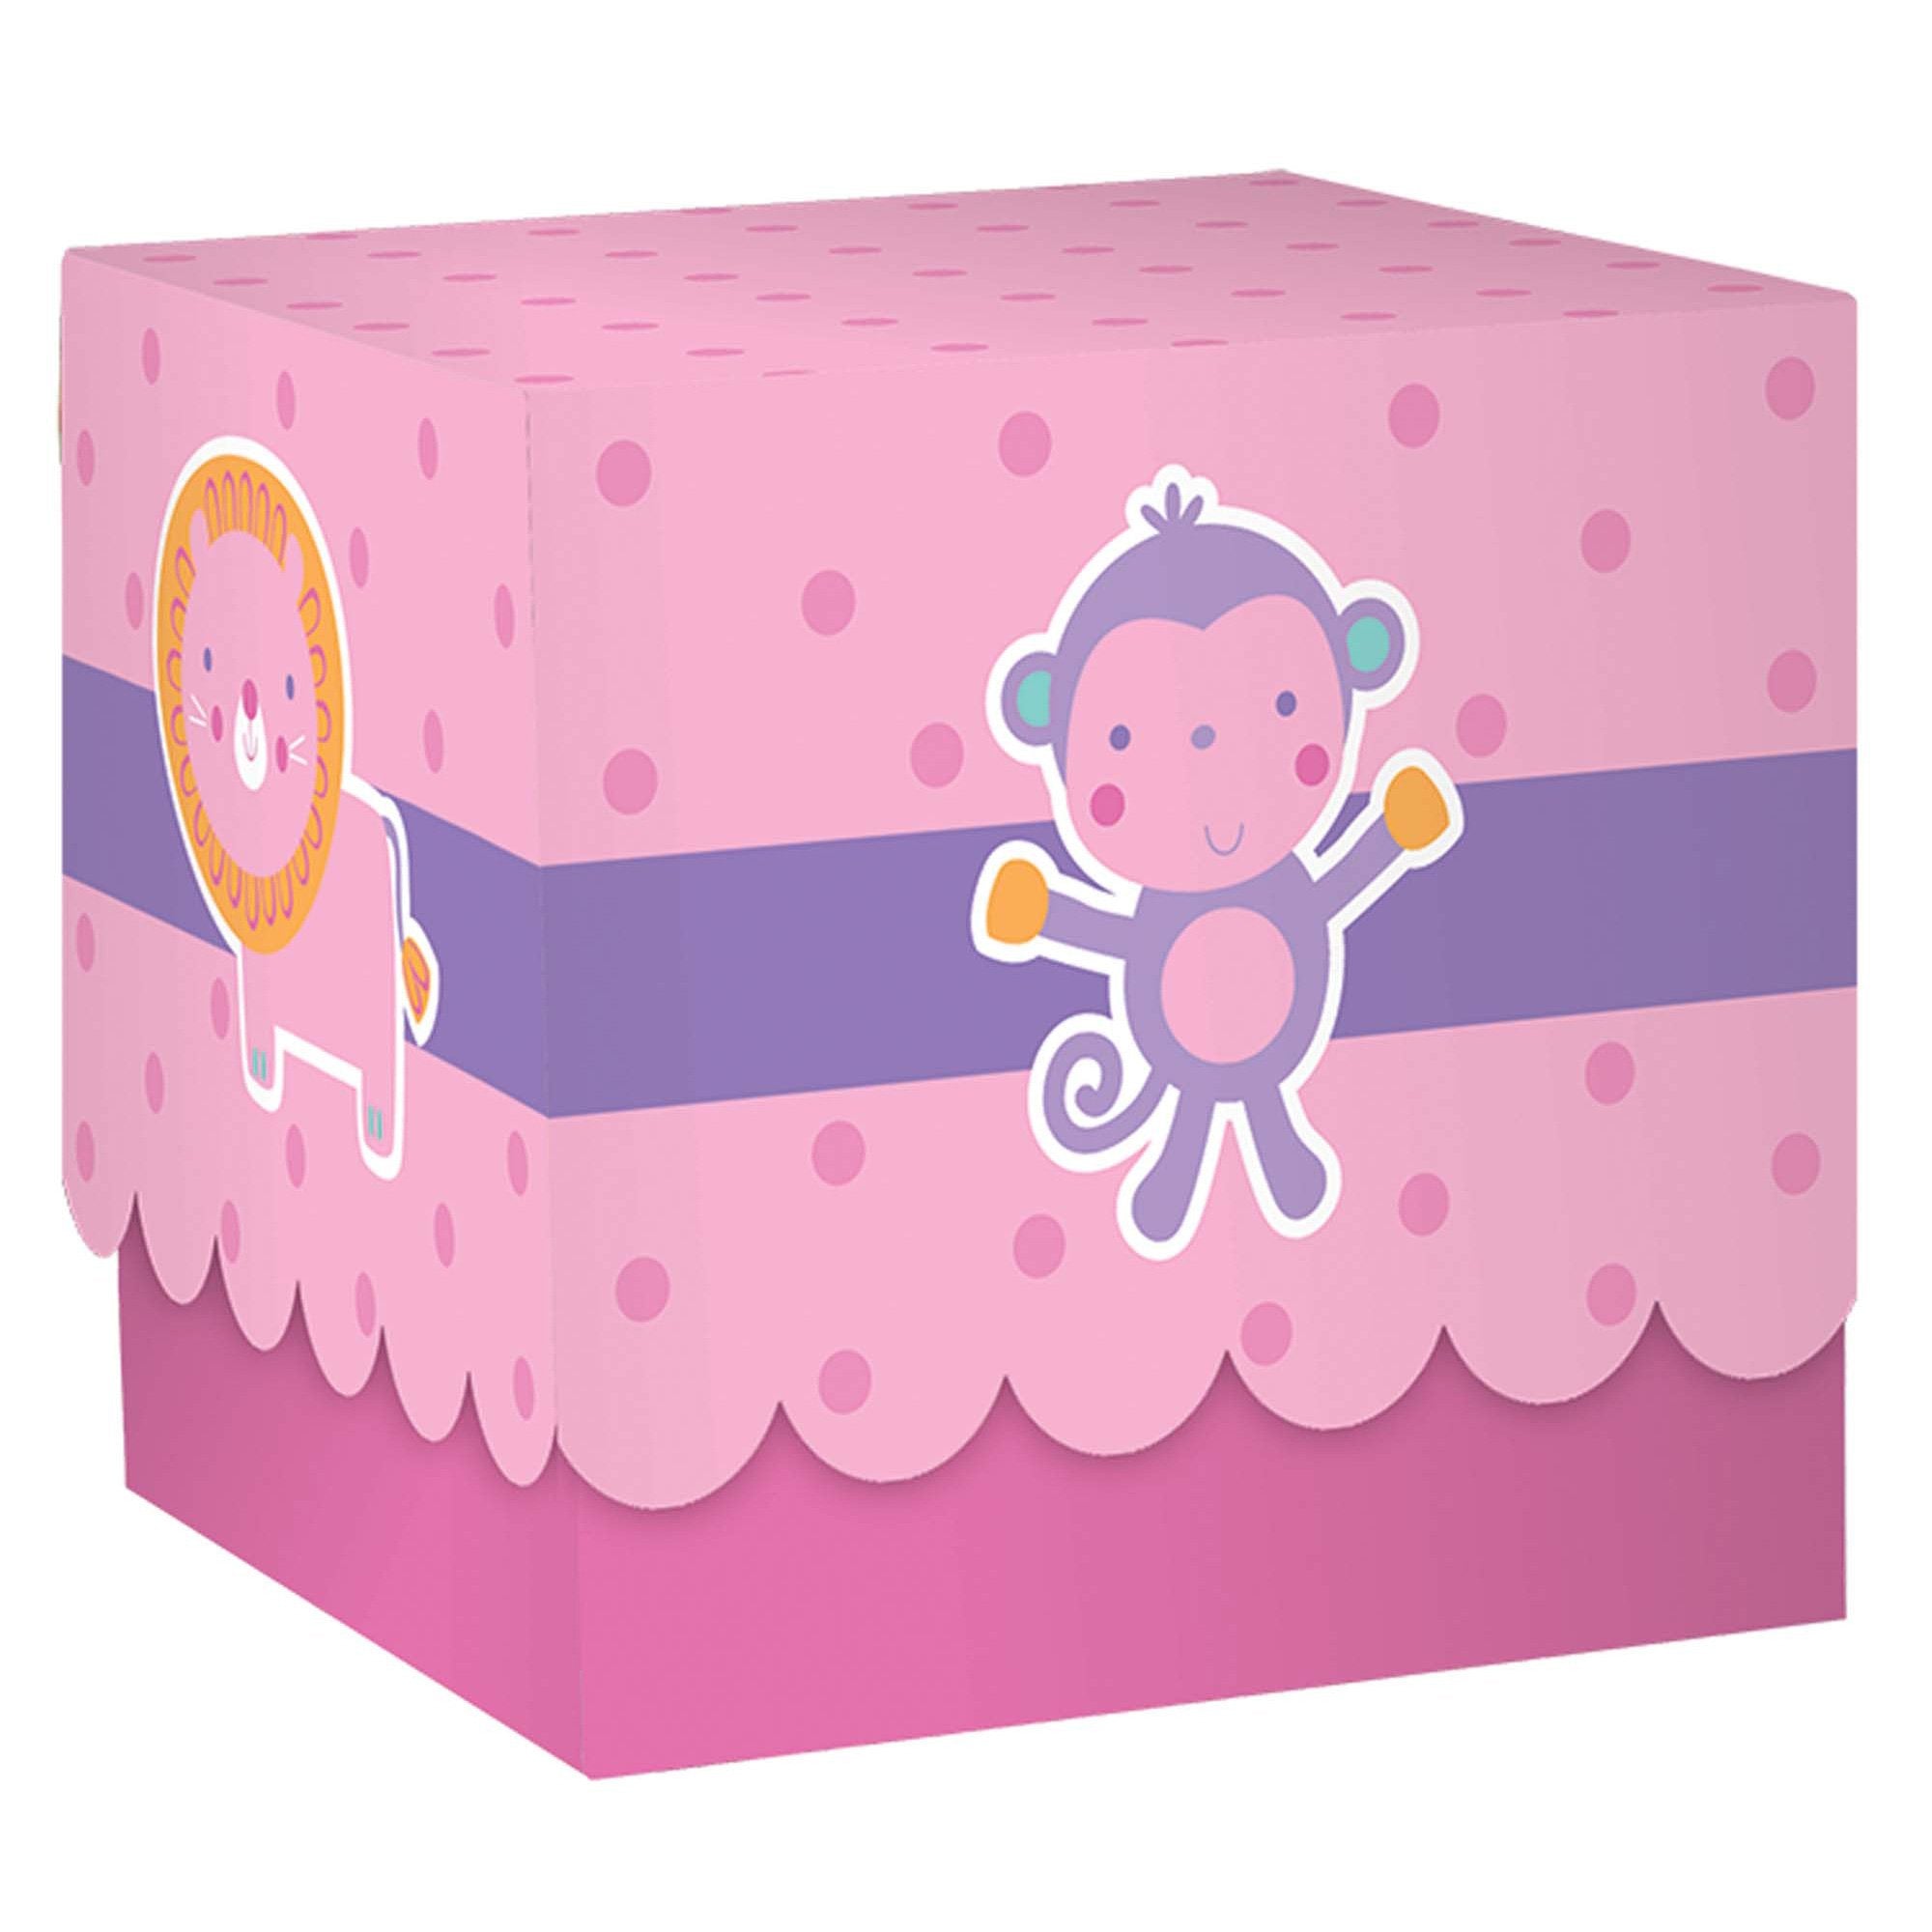 Baby Shower Pink Printed Paper Boxes 24pcs - Party Centre